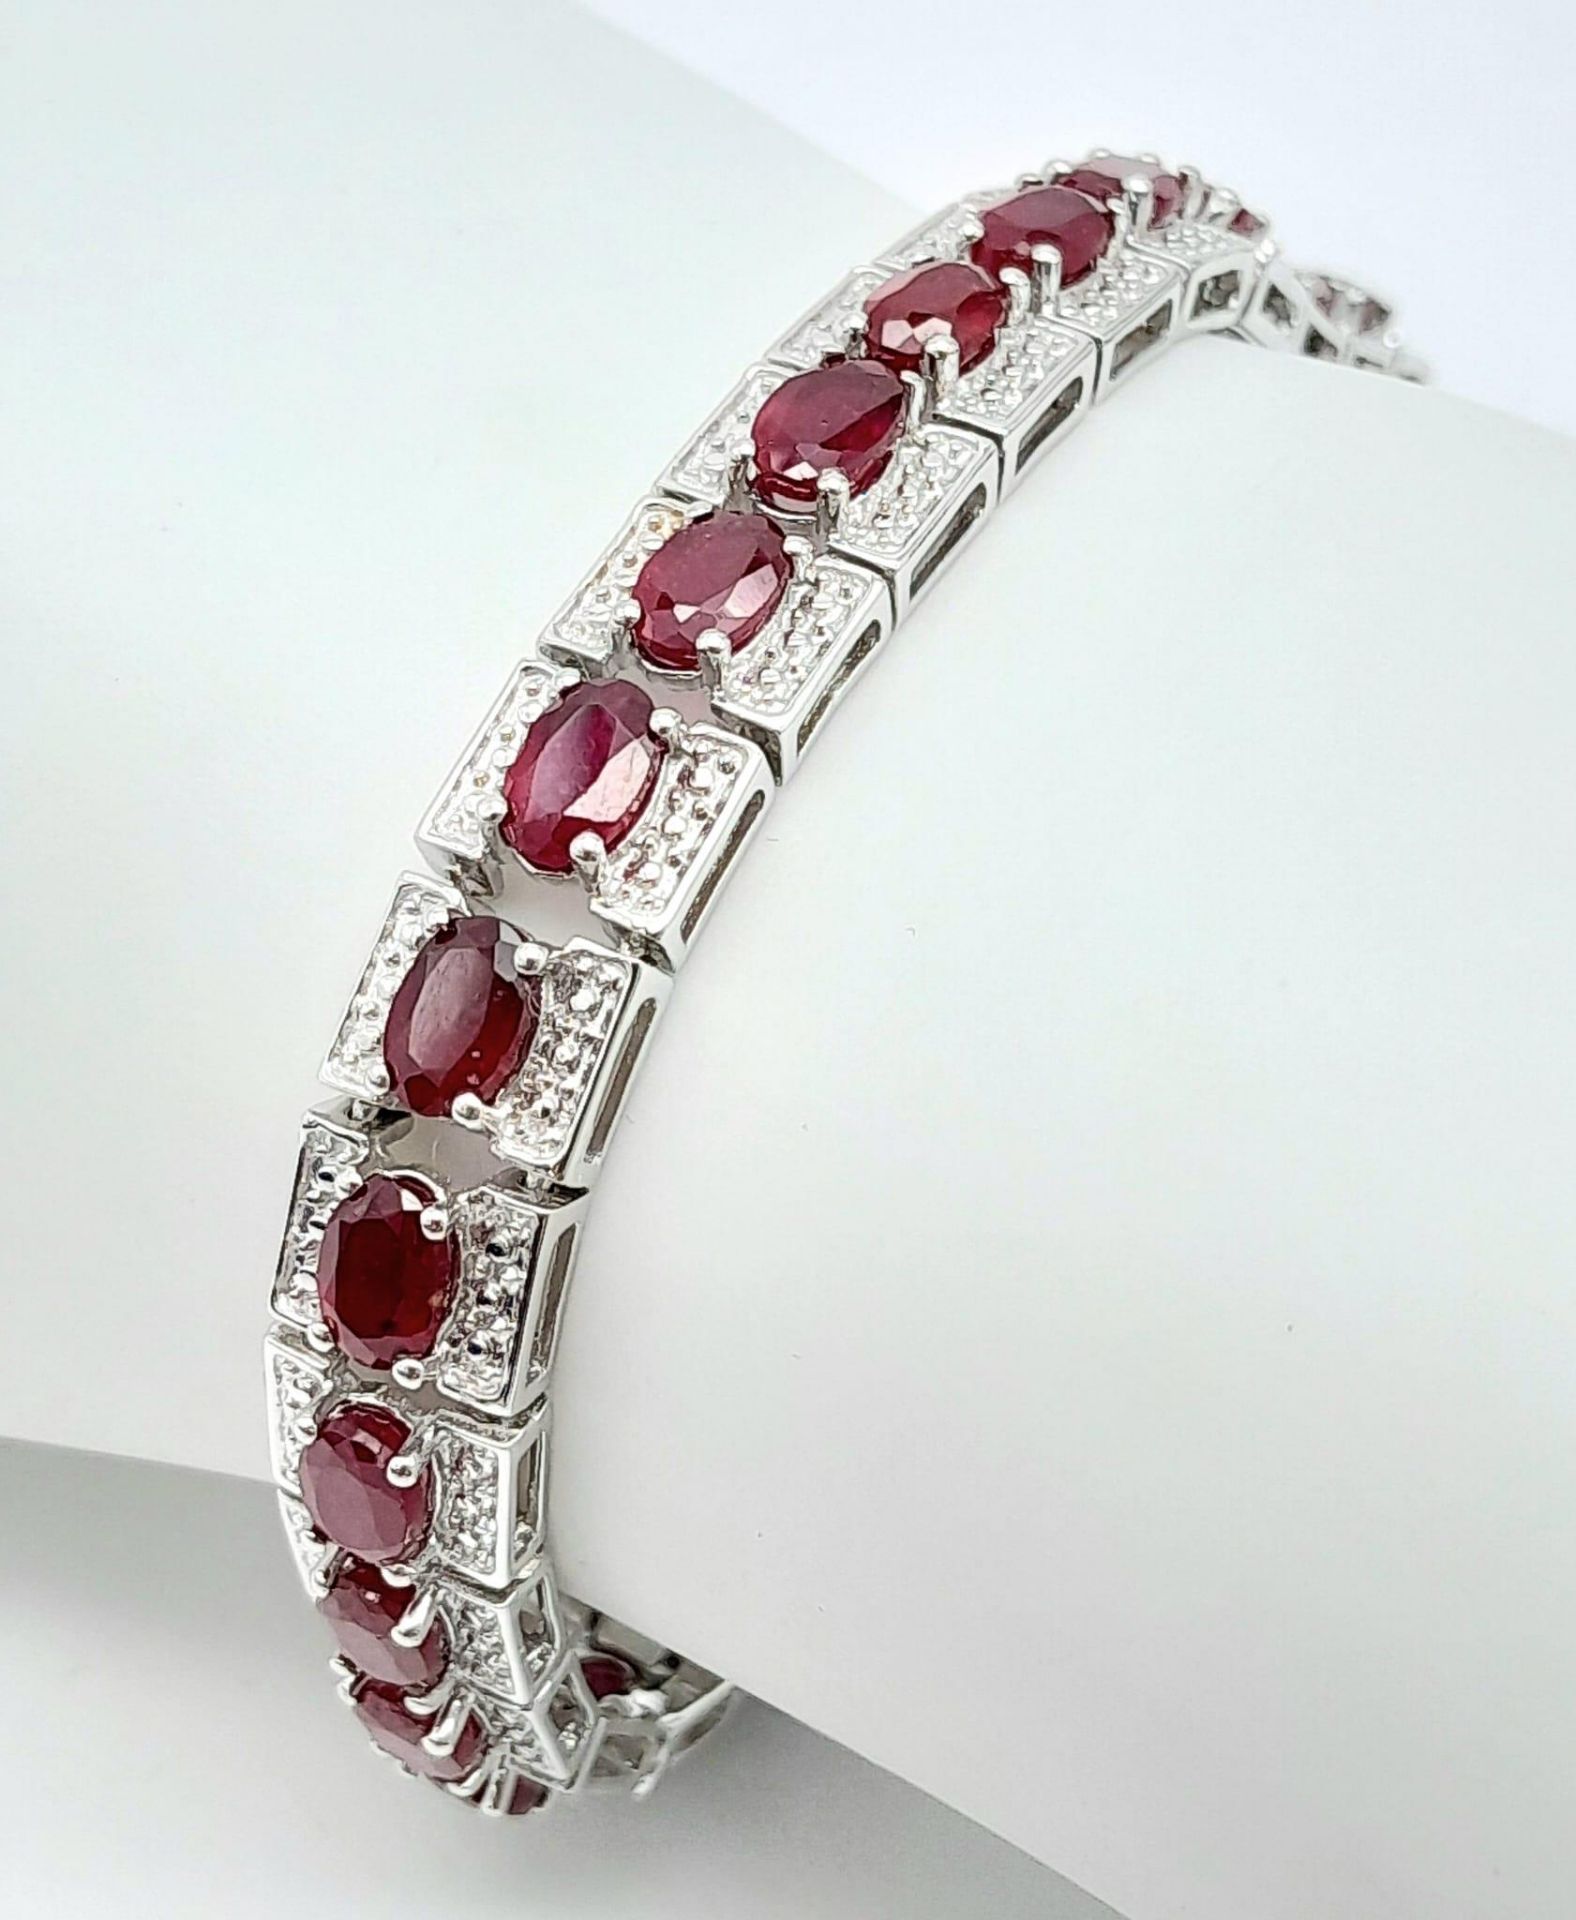 An Exquisite Hallmarked 2018 Sterling Silver 28 Oval Cut Ruby Set Bracelet. Each Ruby Measures 5mm